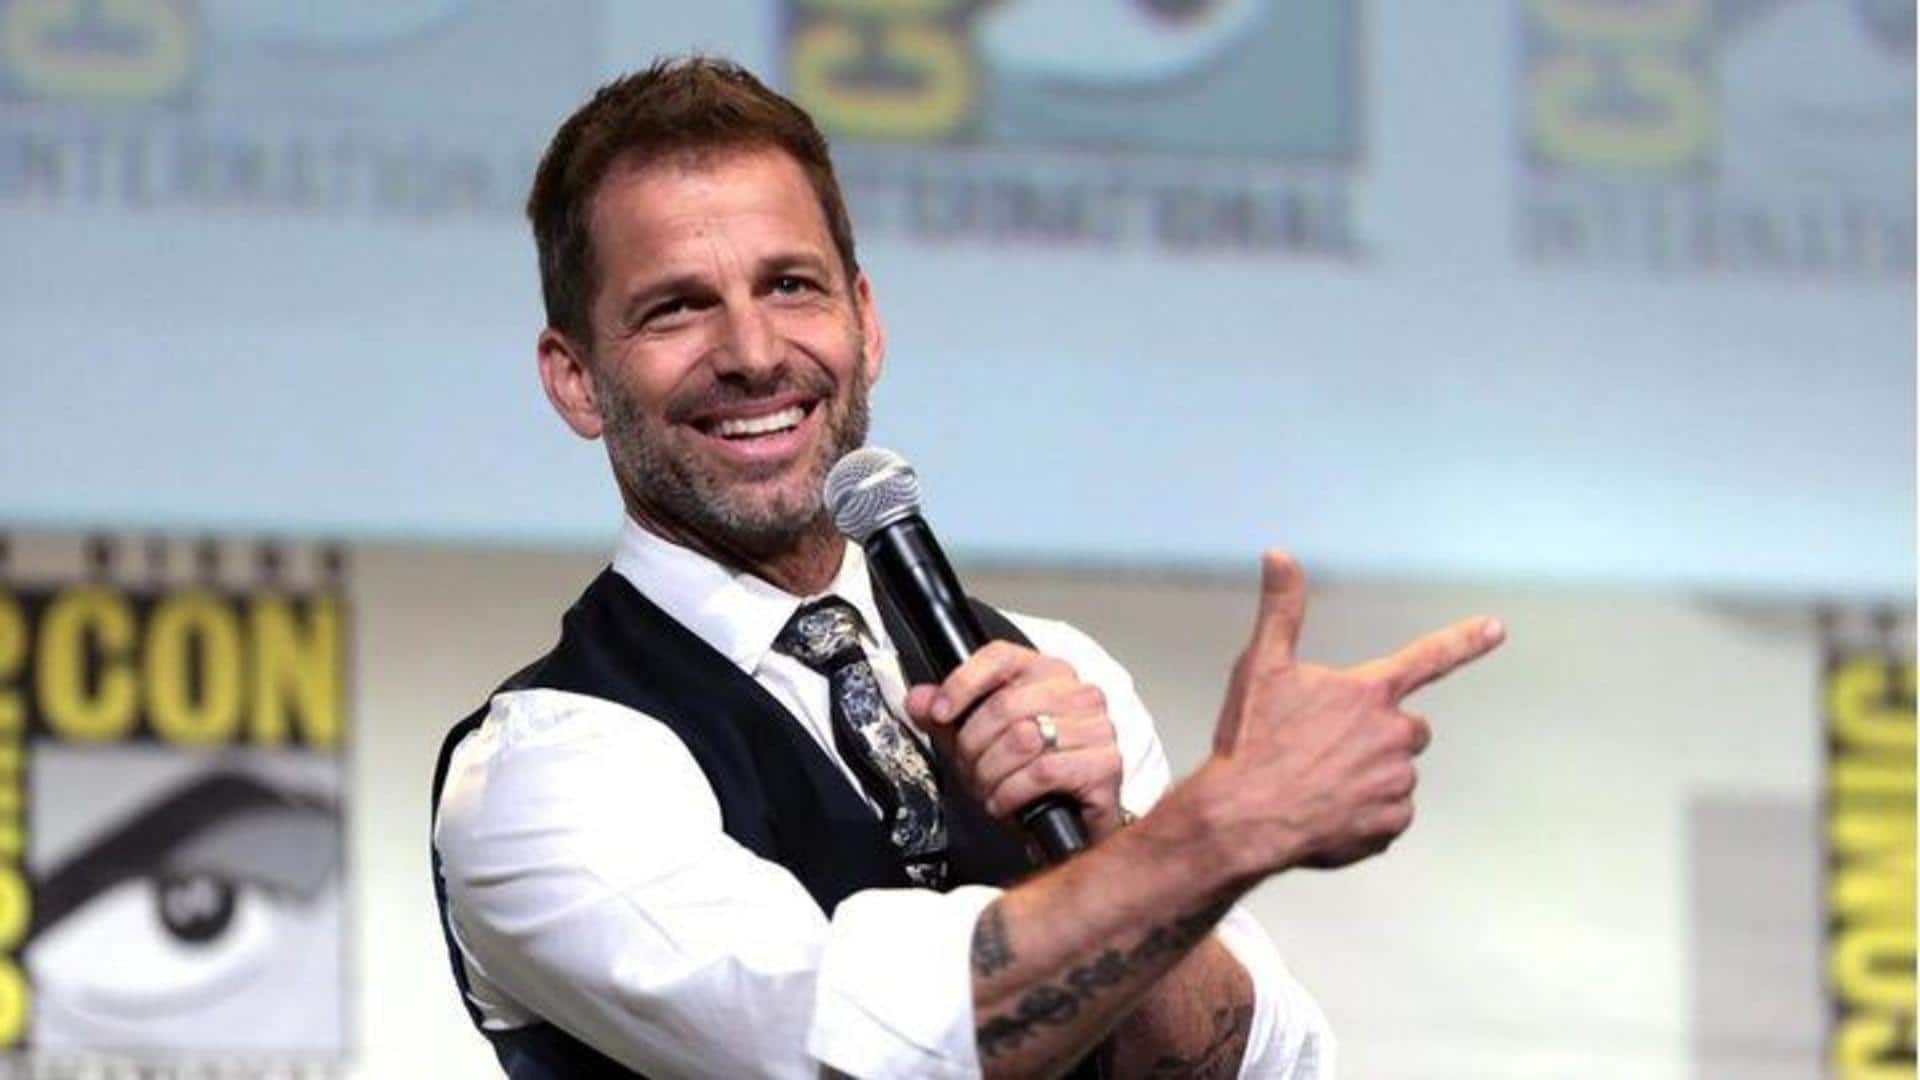 Zack Snyder's tweet leads to speculations amongst DC fans